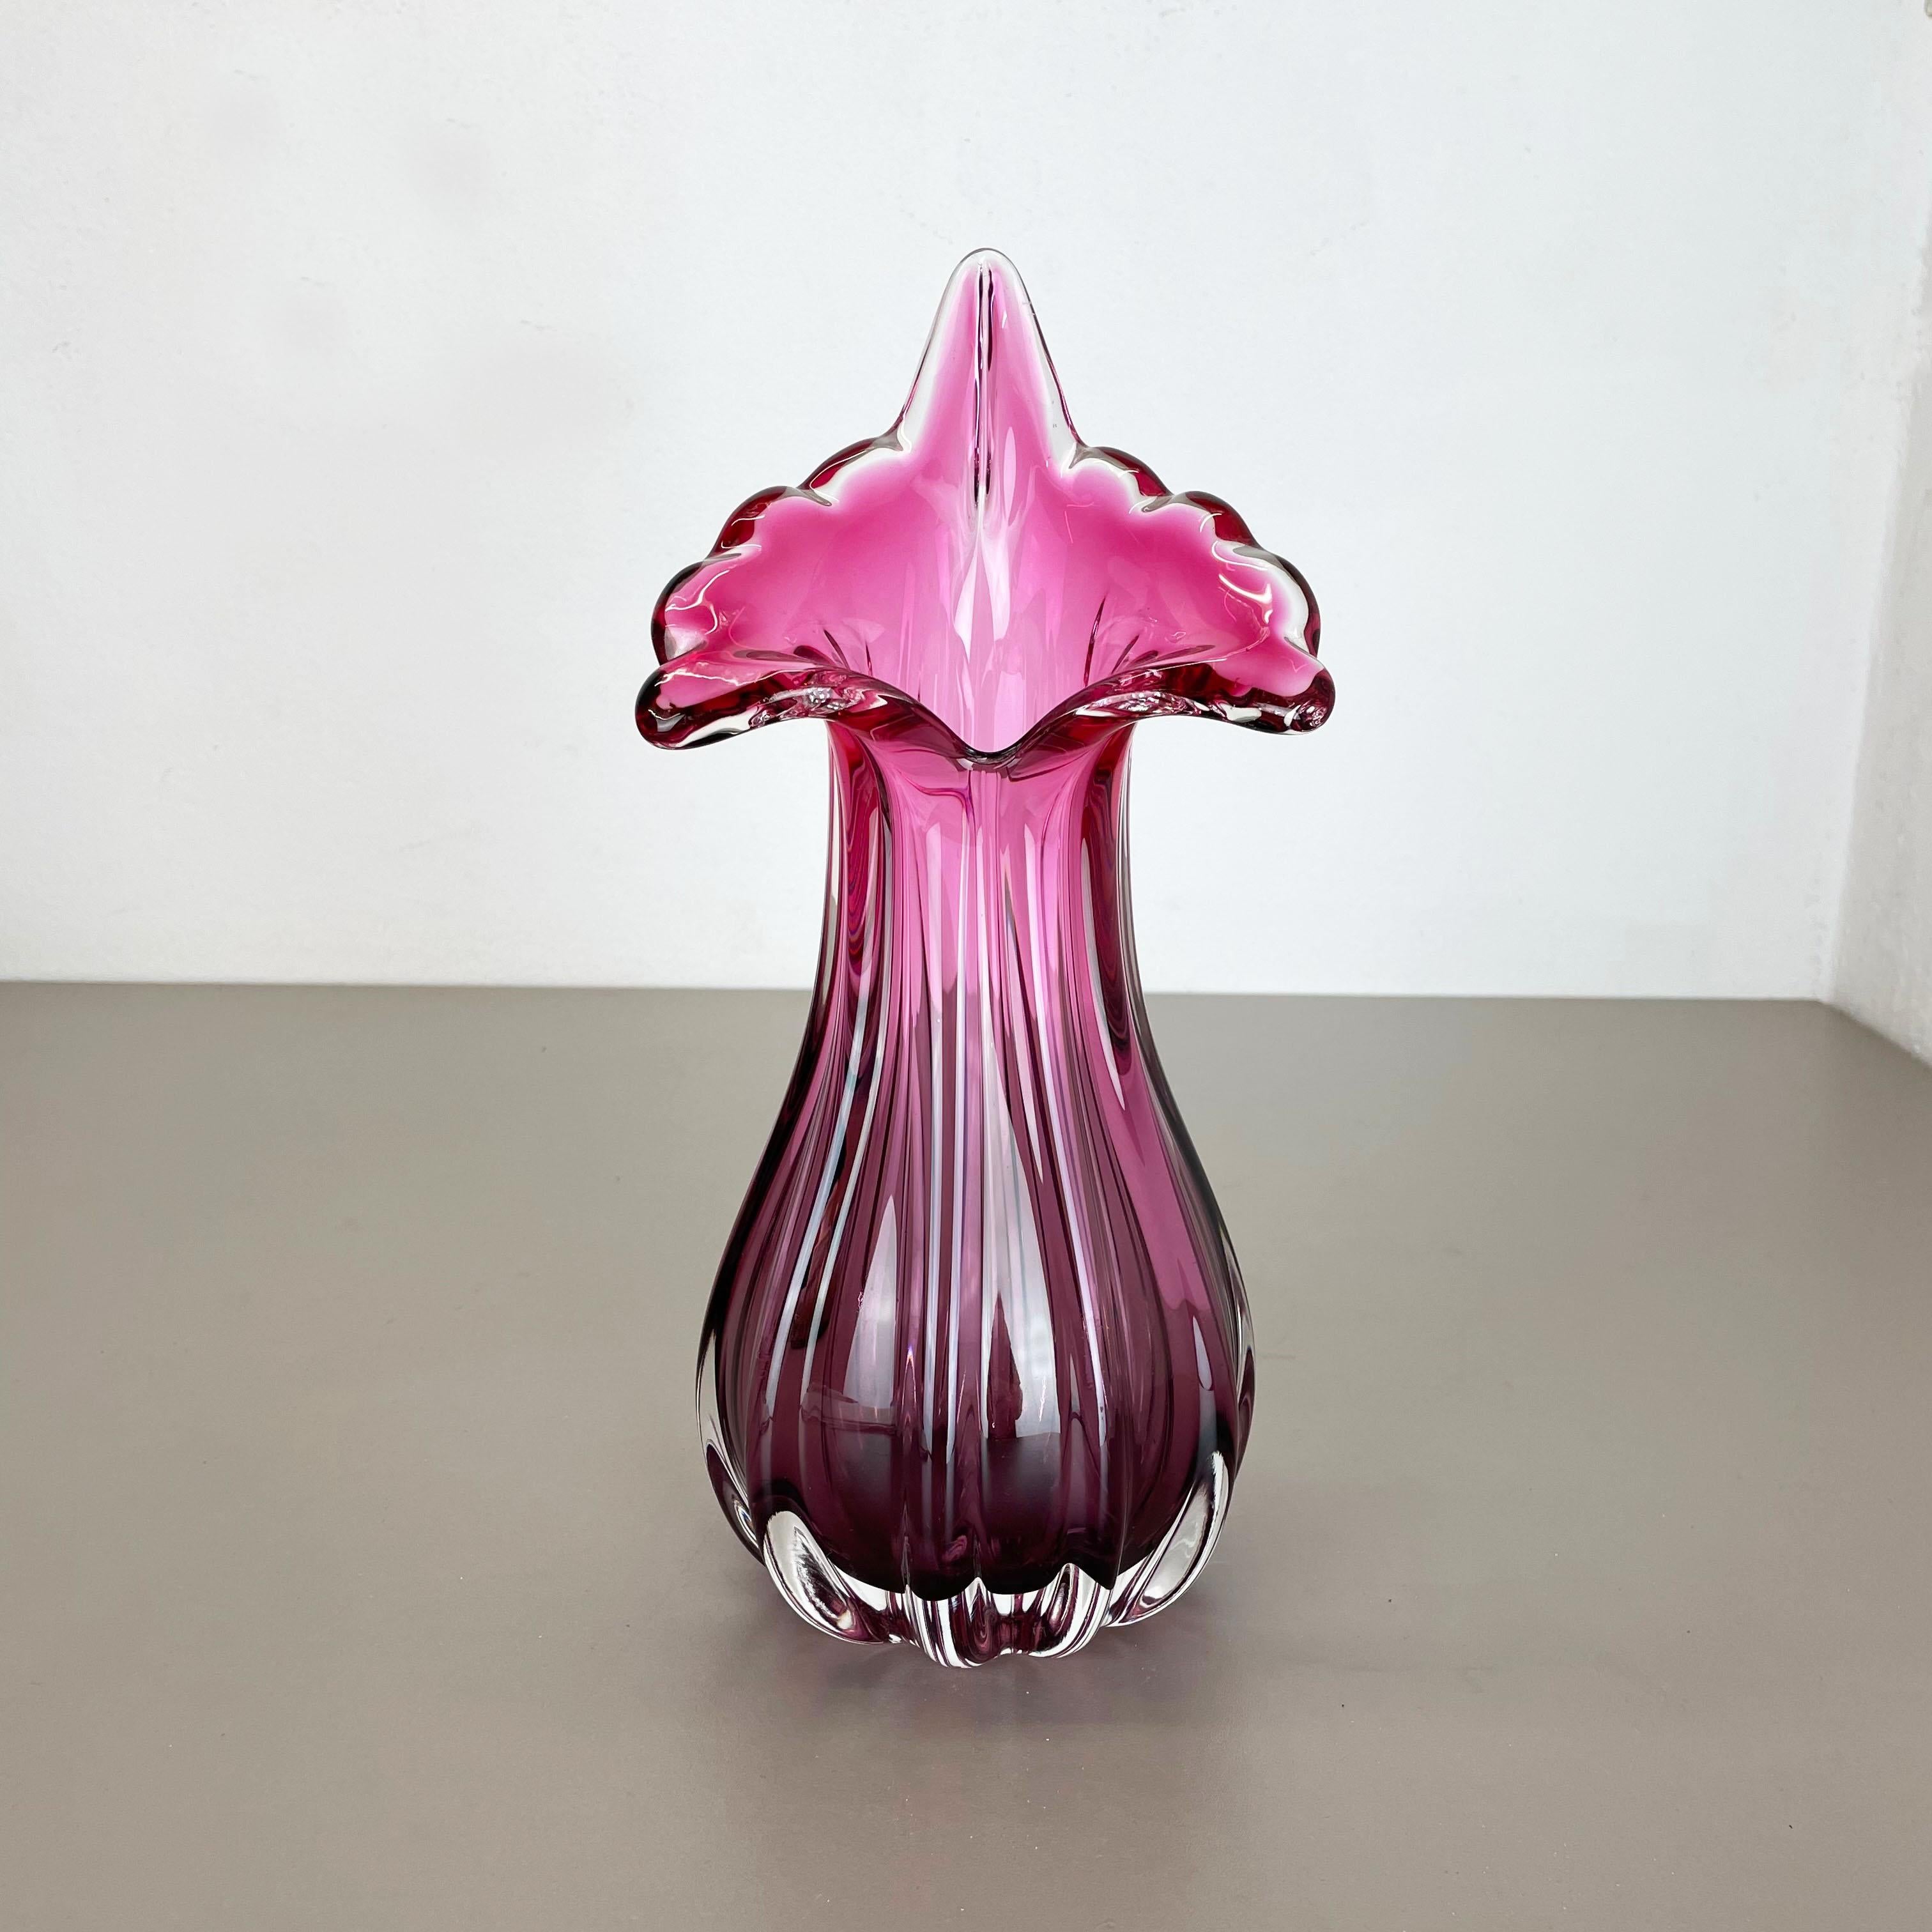 Article:

Murano glass vase


Origin:

Murano, Italy


Decade:

1970s



This original vintage glass vases was designed and produced in the 1970s in Murano, Italy. It is made in murano glass technique and has a fantastic organic